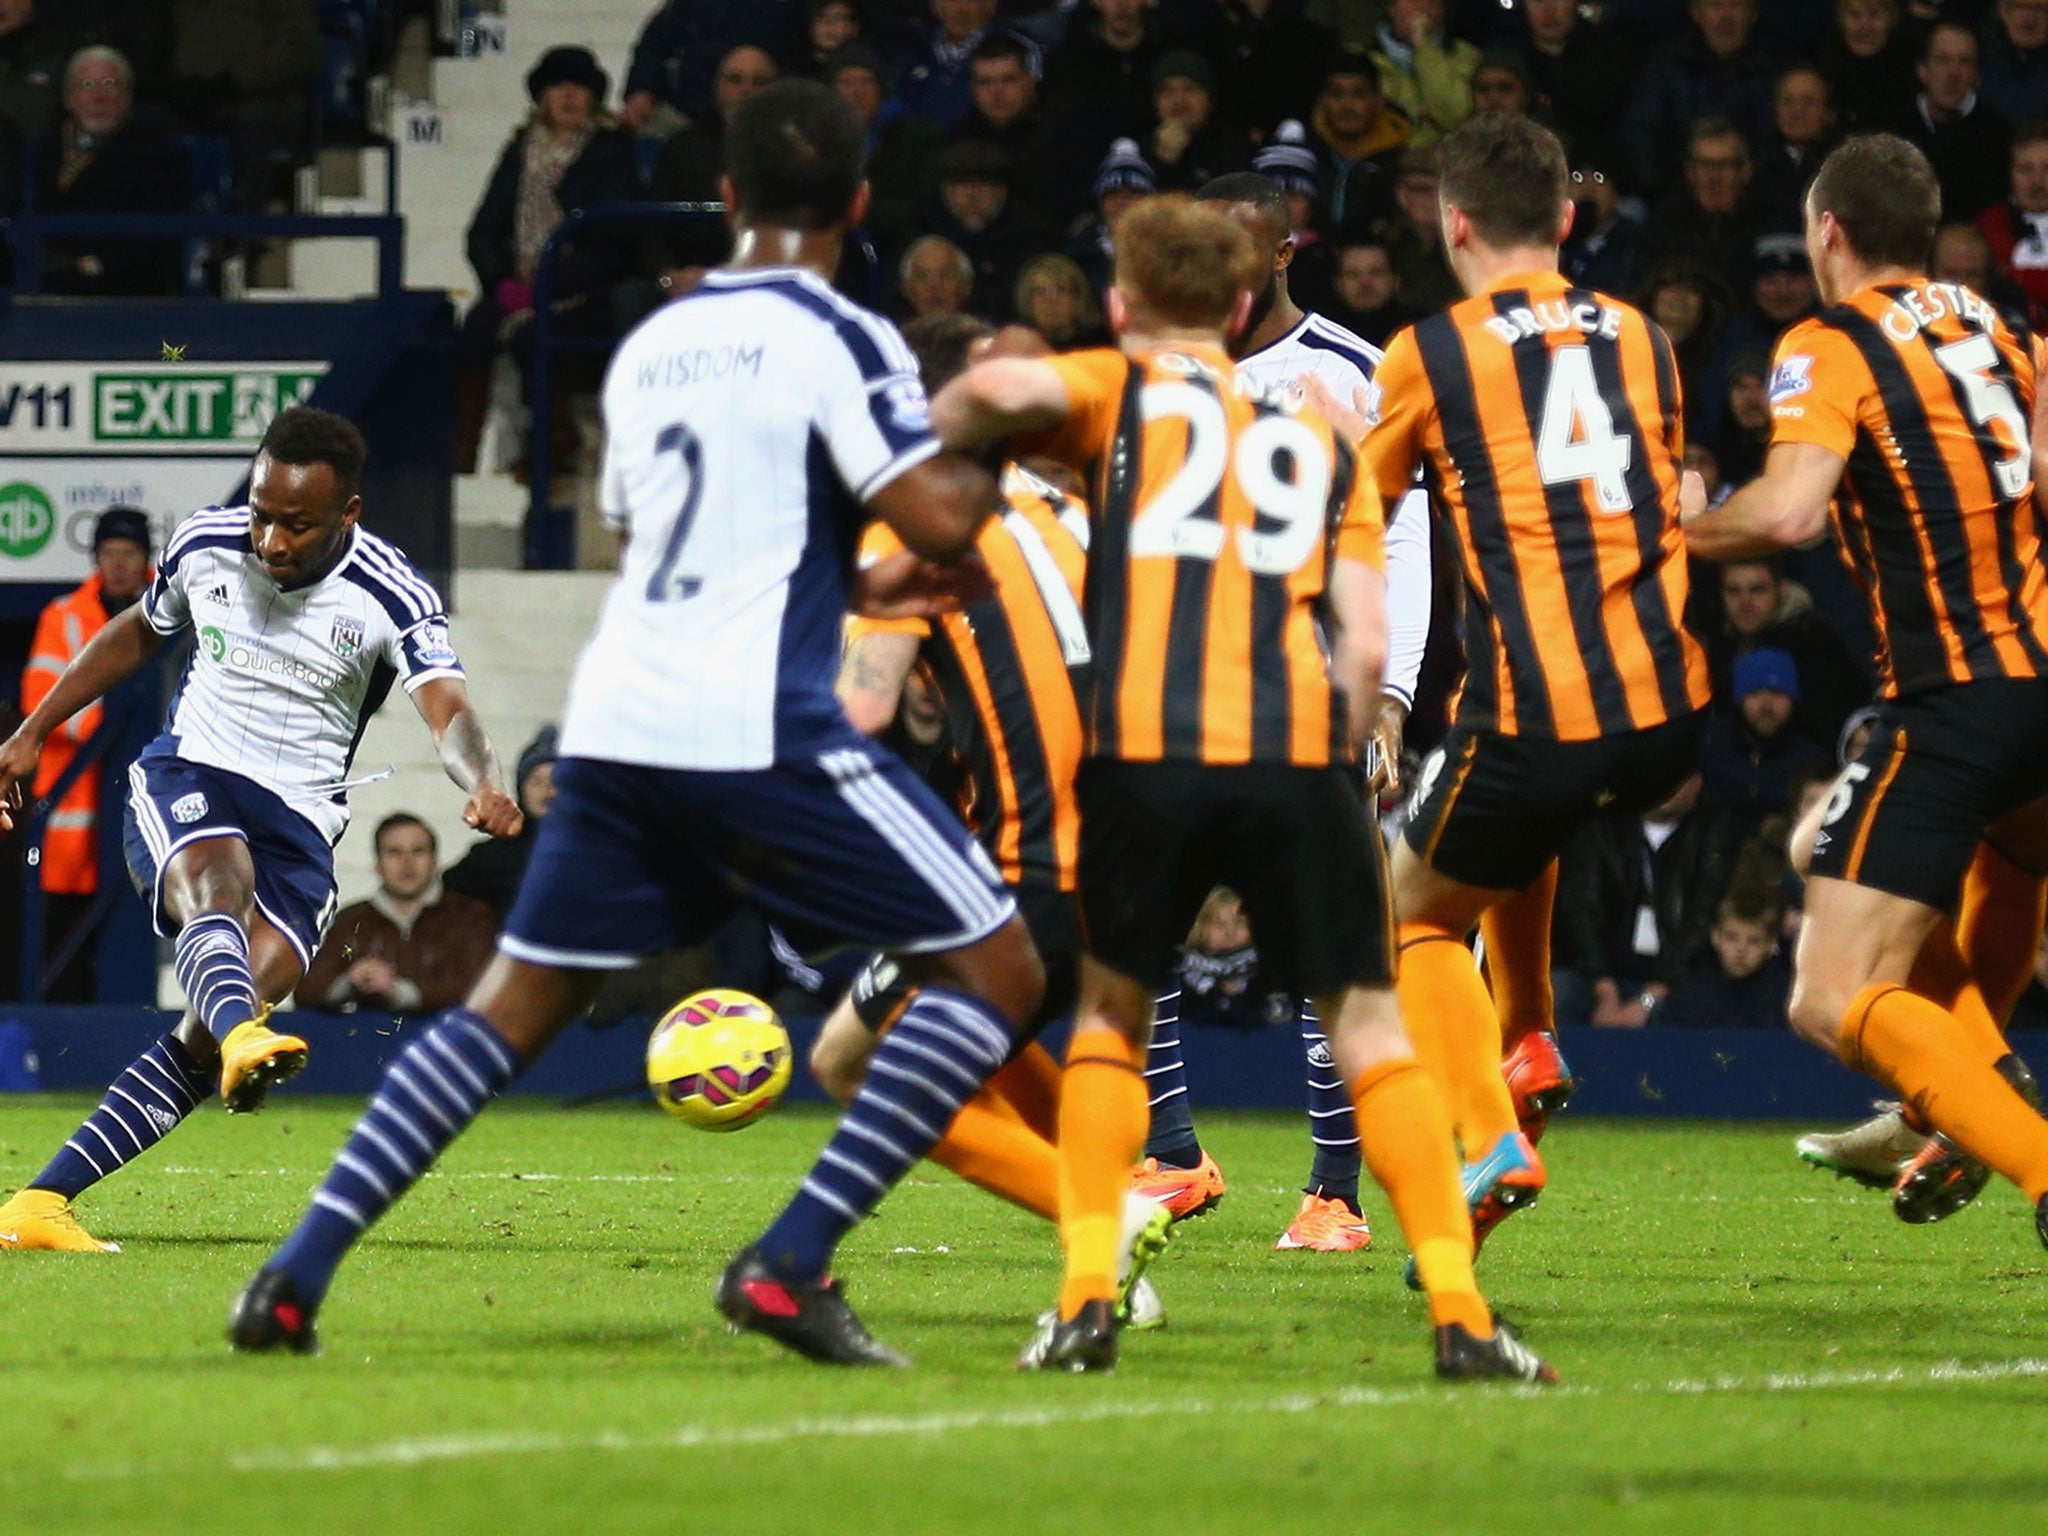 Saido Berahino scores to give West Brom a 1-0 win over Hull